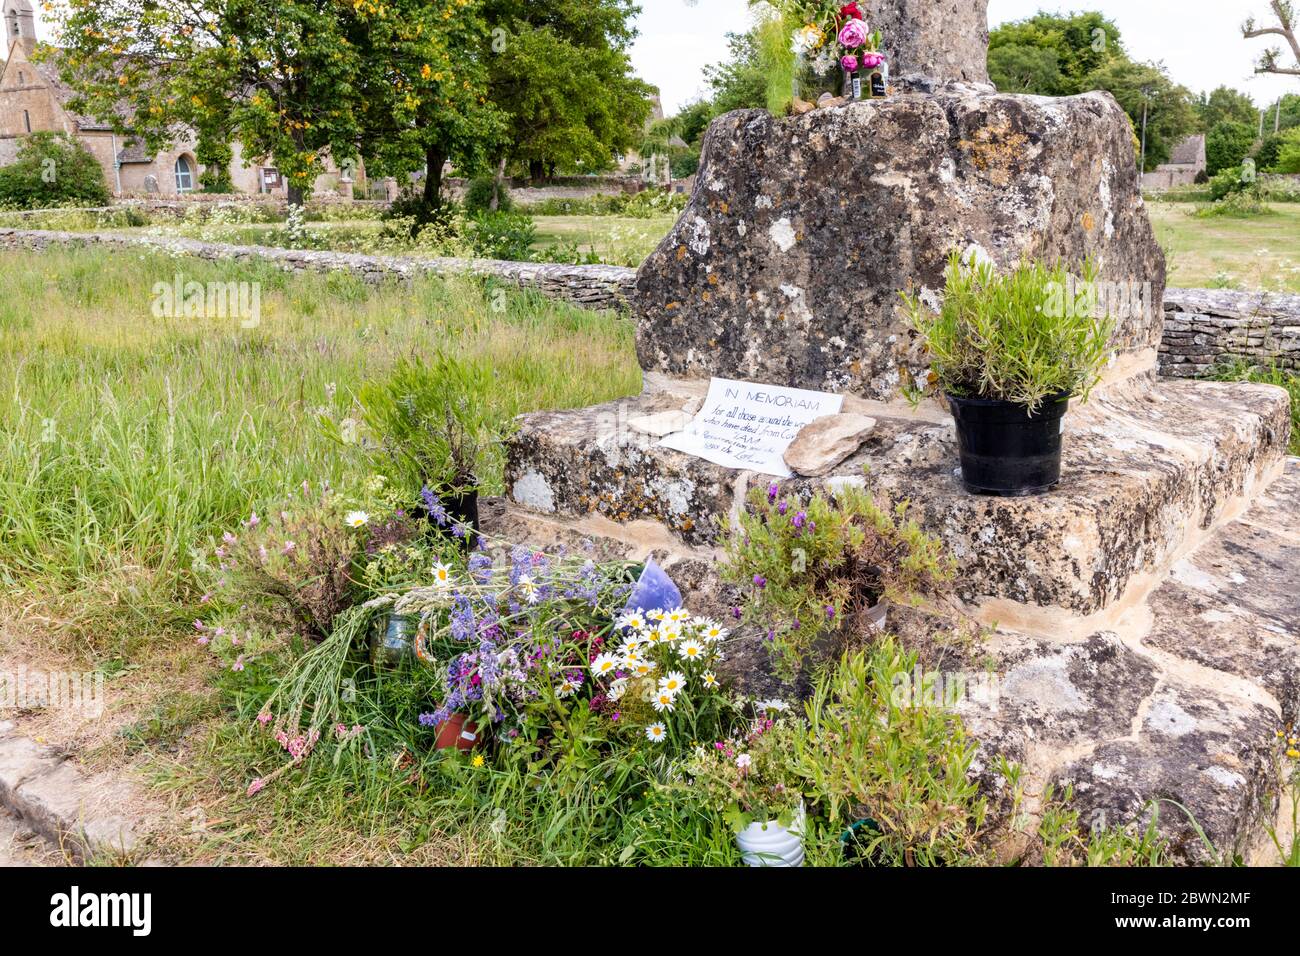 An In Memoriam to victims of Covid 19 on the 14th century wayside cross in the Cotswold village of Condicote, Gloucestershire UK. Stock Photo